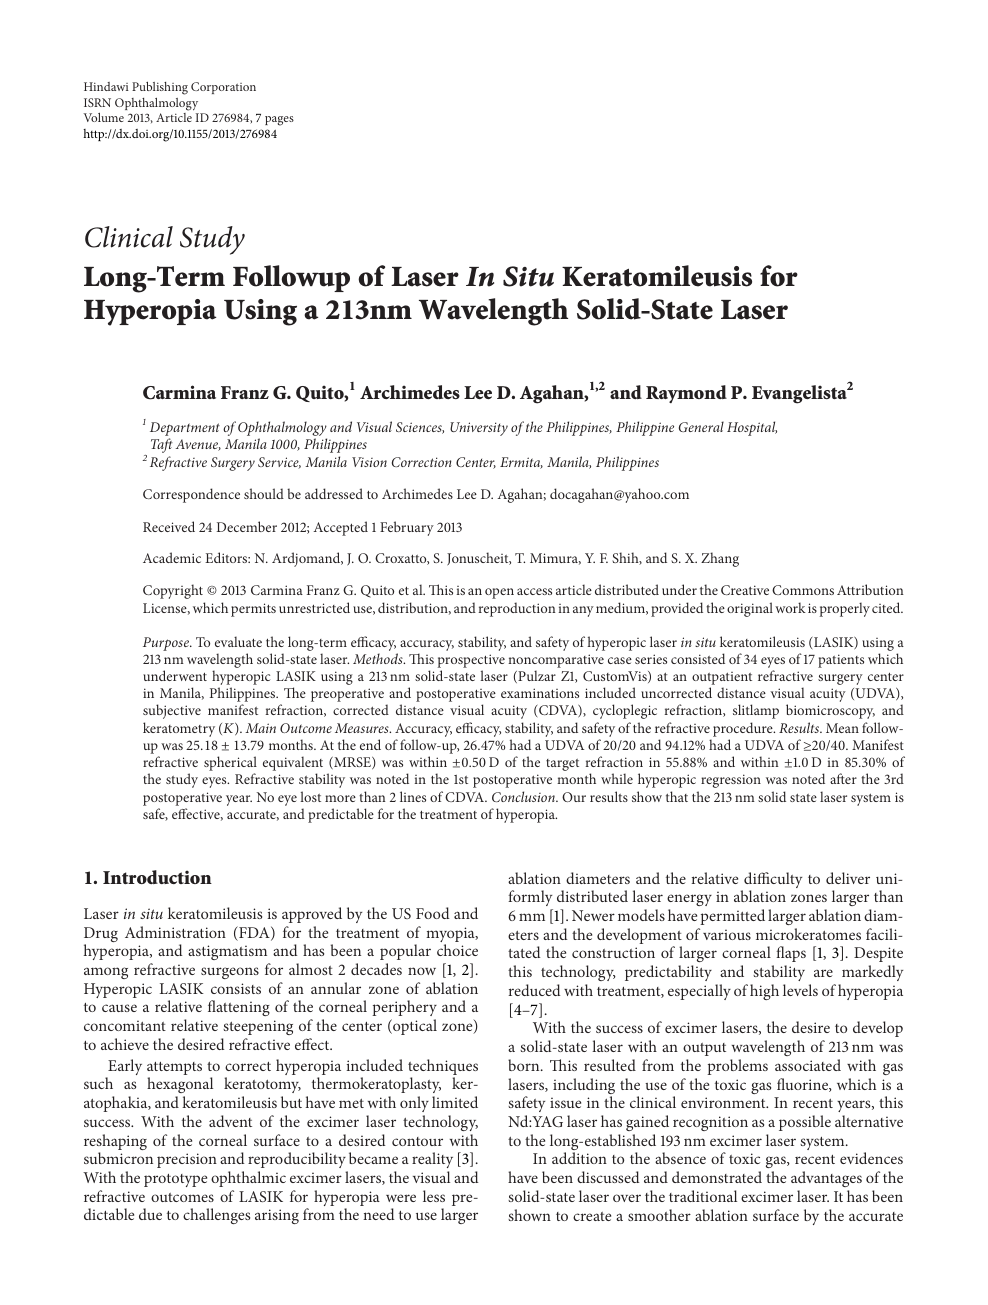 Long Term Followup Of Laser In Situ Keratomileusis For Hyperopia Using A 213 Nm Wavelength Solid State Laser Topic Of Research Paper In Clinical Medicine Download Scholarly Article Pdf And Read For Free